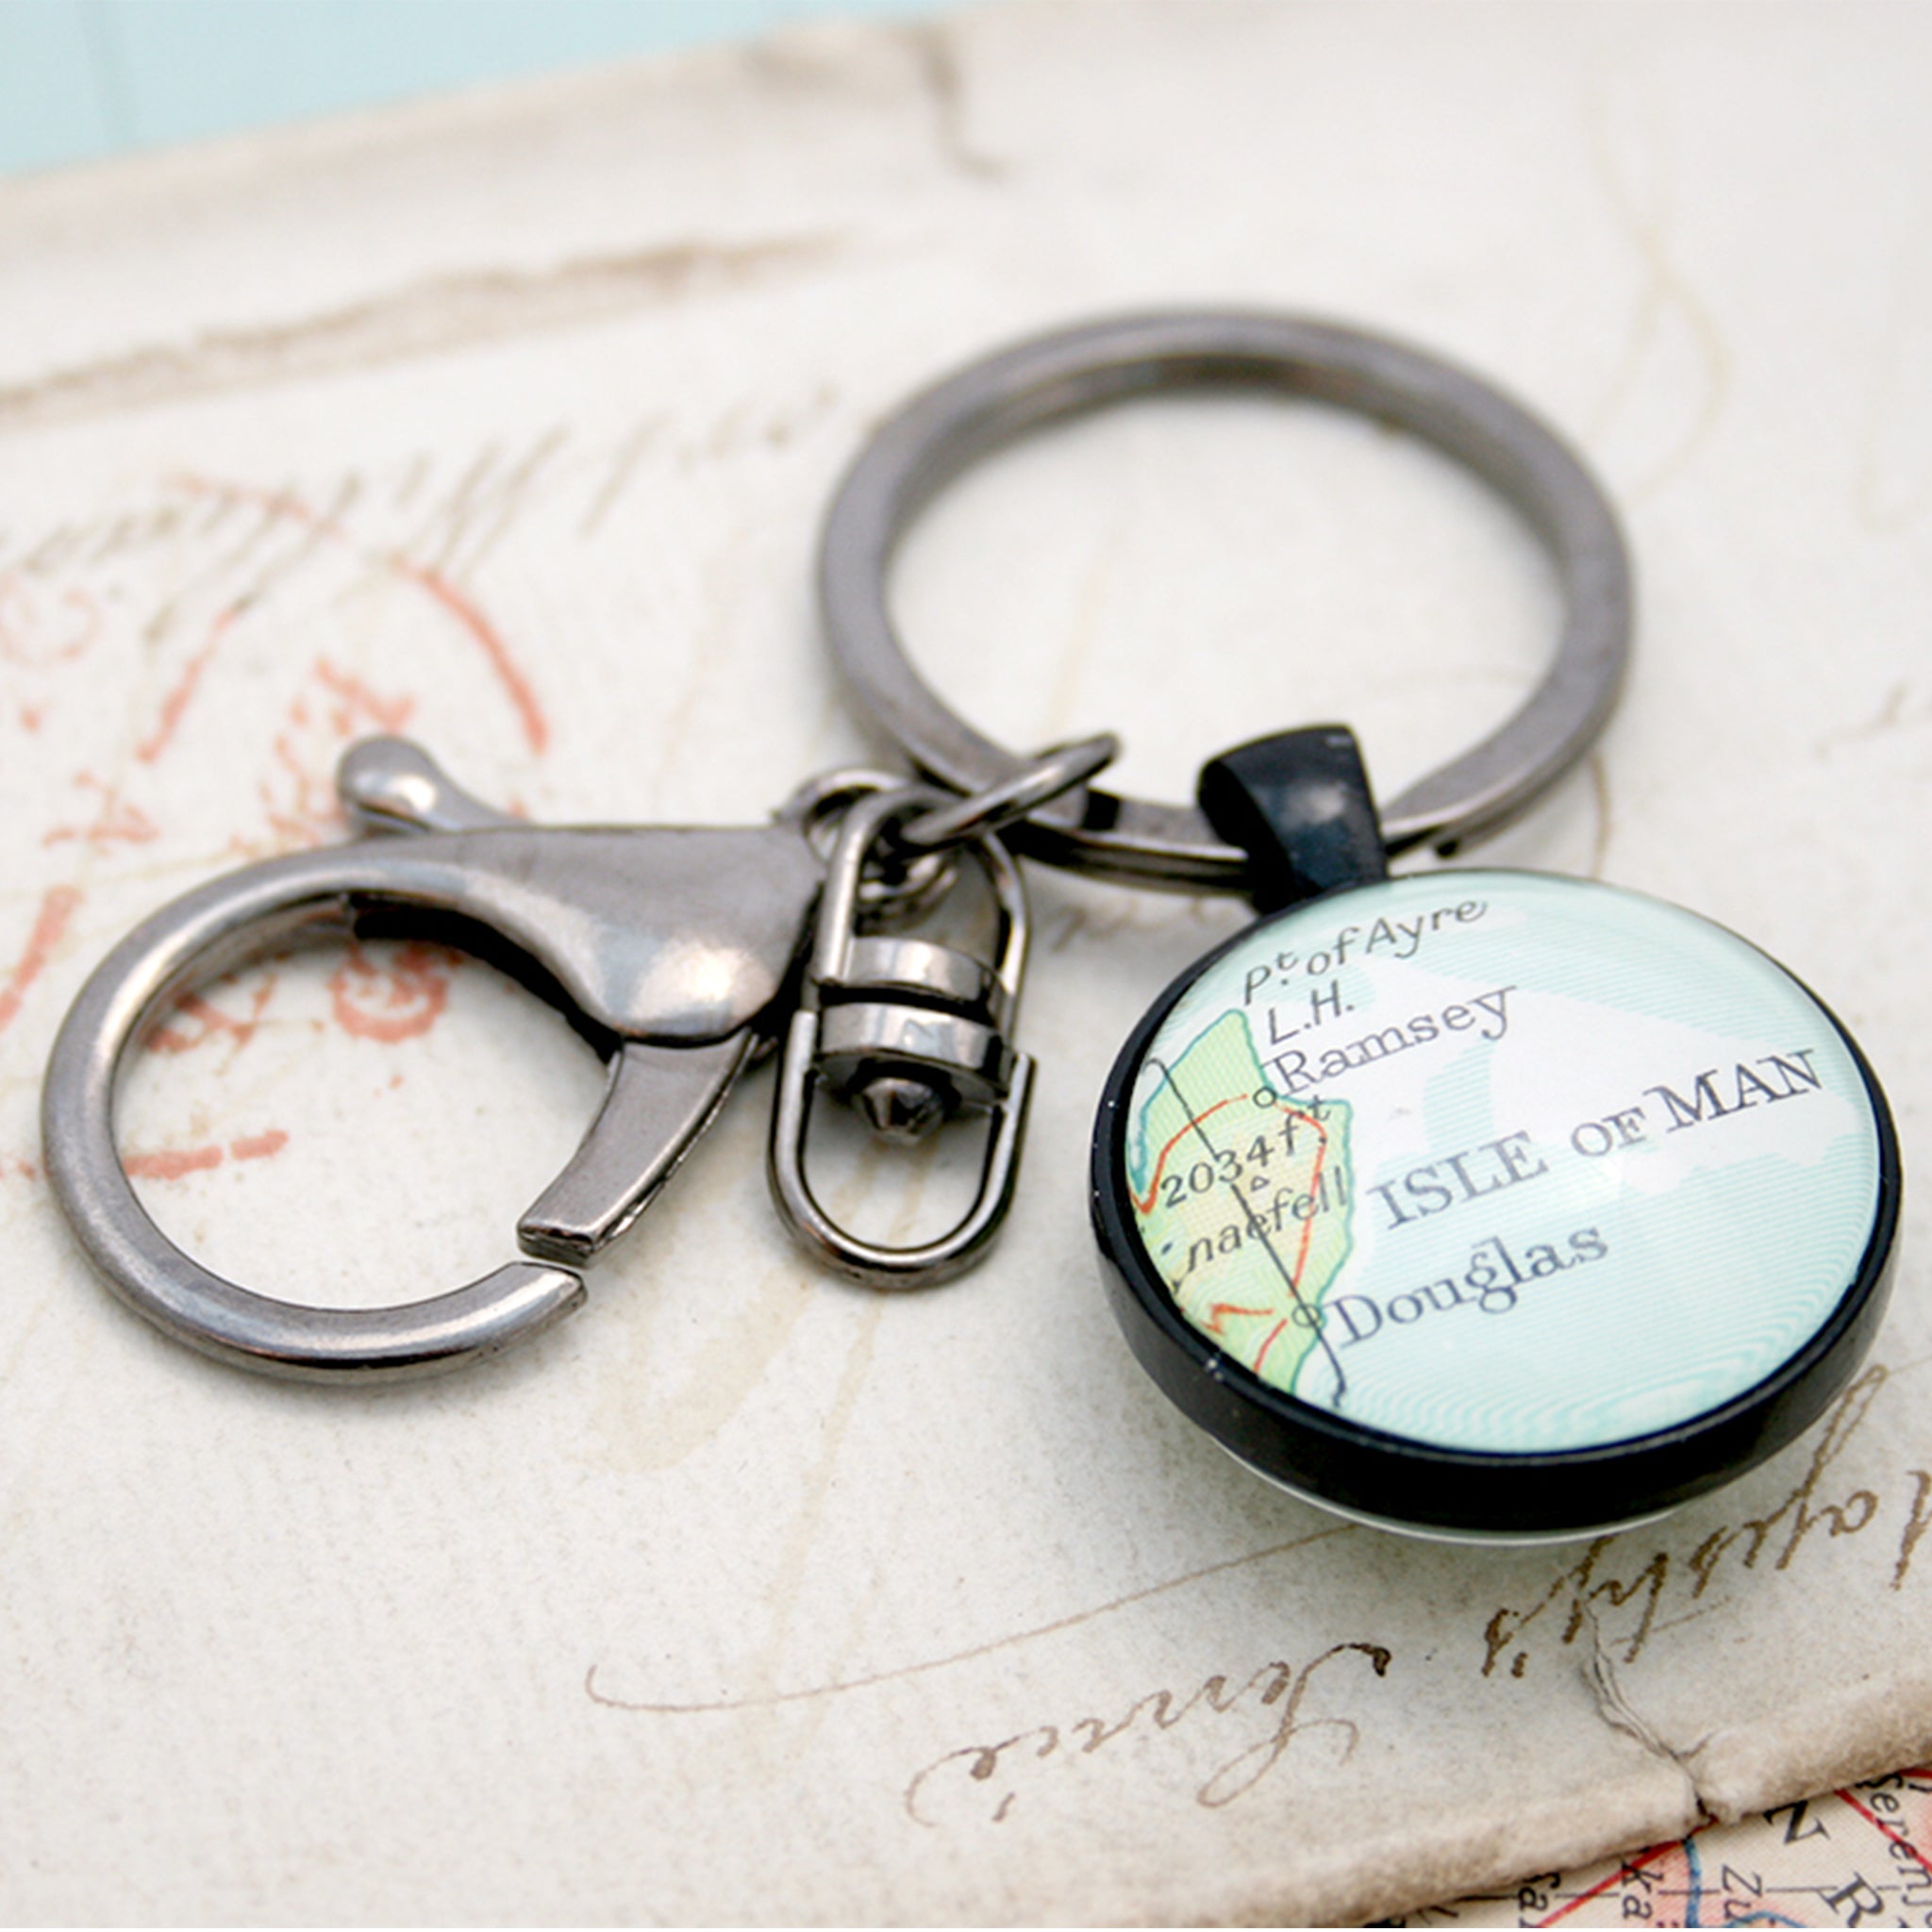 Personalised Keyring in black color featuring map of Isle of Man